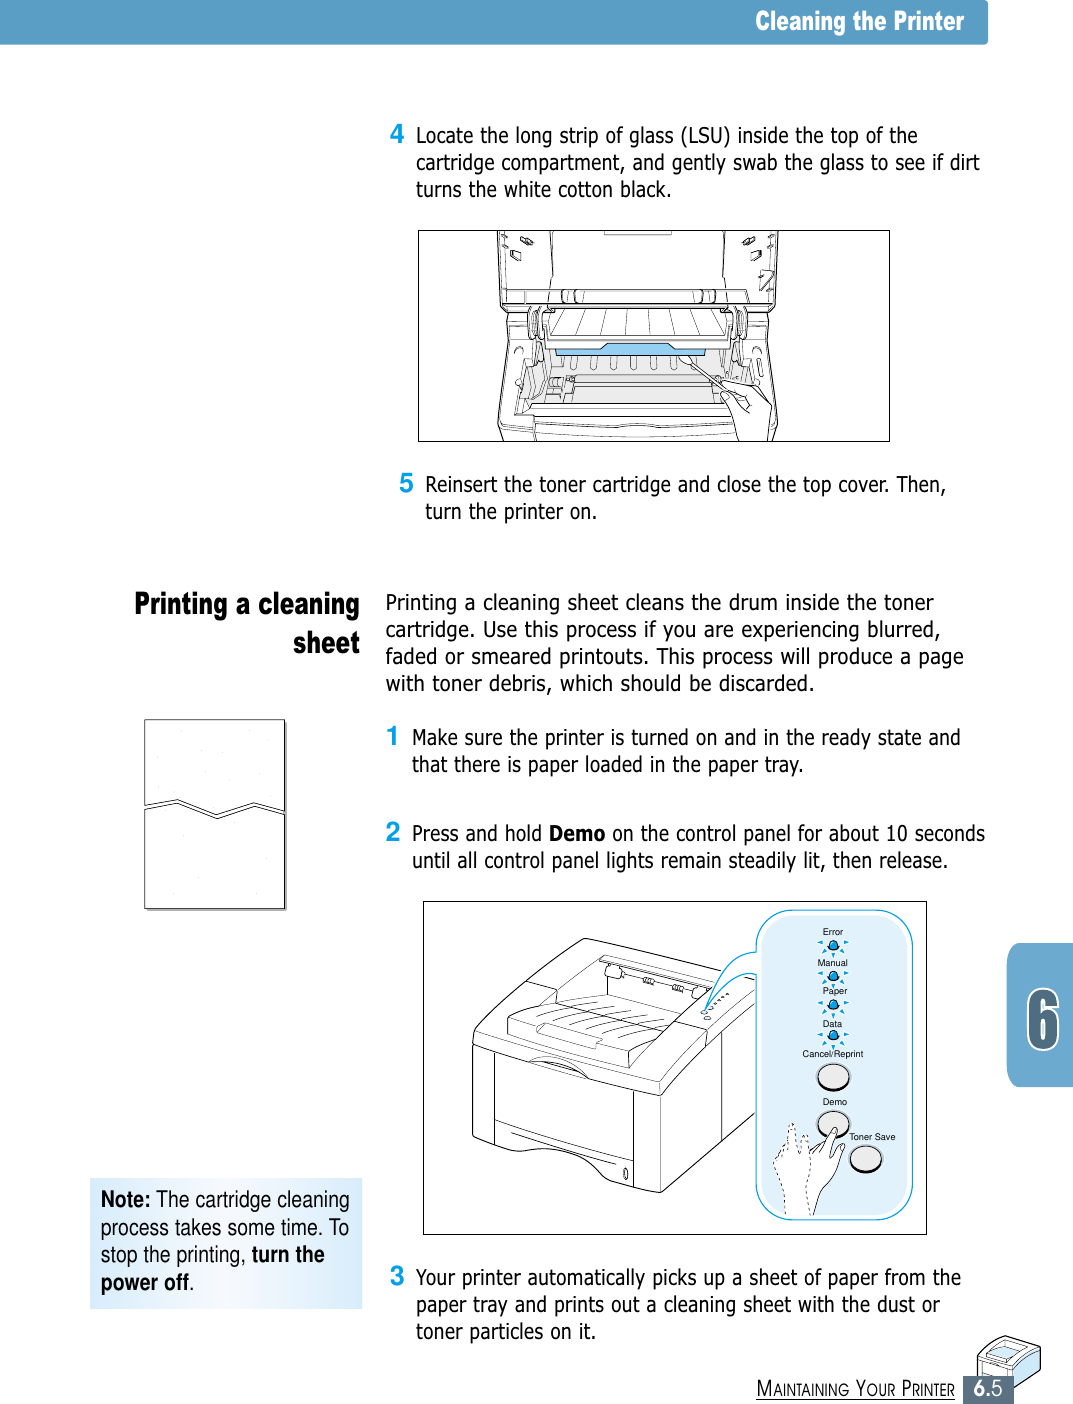 6.5MAINTAINING YOUR PRINTER3Your printer automatically picks up a sheet of paper from thepaper tray and prints out a cleaning sheet with the dust ortoner particles on it.5Reinsert the toner cartridge and close the top cover. Then,turn the printer on.Note: The cartridge cleaningprocess takes some time. Tostop the printing, turn thepower off.Cleaning the PrinterPrinting a cleaningsheet Printing a cleaning sheet cleans the drum inside the tonercartridge. Use this process if you are experiencing blurred,faded or smeared printouts. This process will produce a pagewith toner debris, which should be discarded.1Make sure the printer is turned on and in the ready state andthat there is paper loaded in the paper tray.2Press and hold Demo on the control panel for about 10 secondsuntil all control panel lights remain steadily lit, then release.4Locate the long strip of glass (LSU) inside the top of thecartridge compartment, and gently swab the glass to see if dirtturns the white cotton black.ErrorManualPaperDataCancel/ReprintDemoToner Save